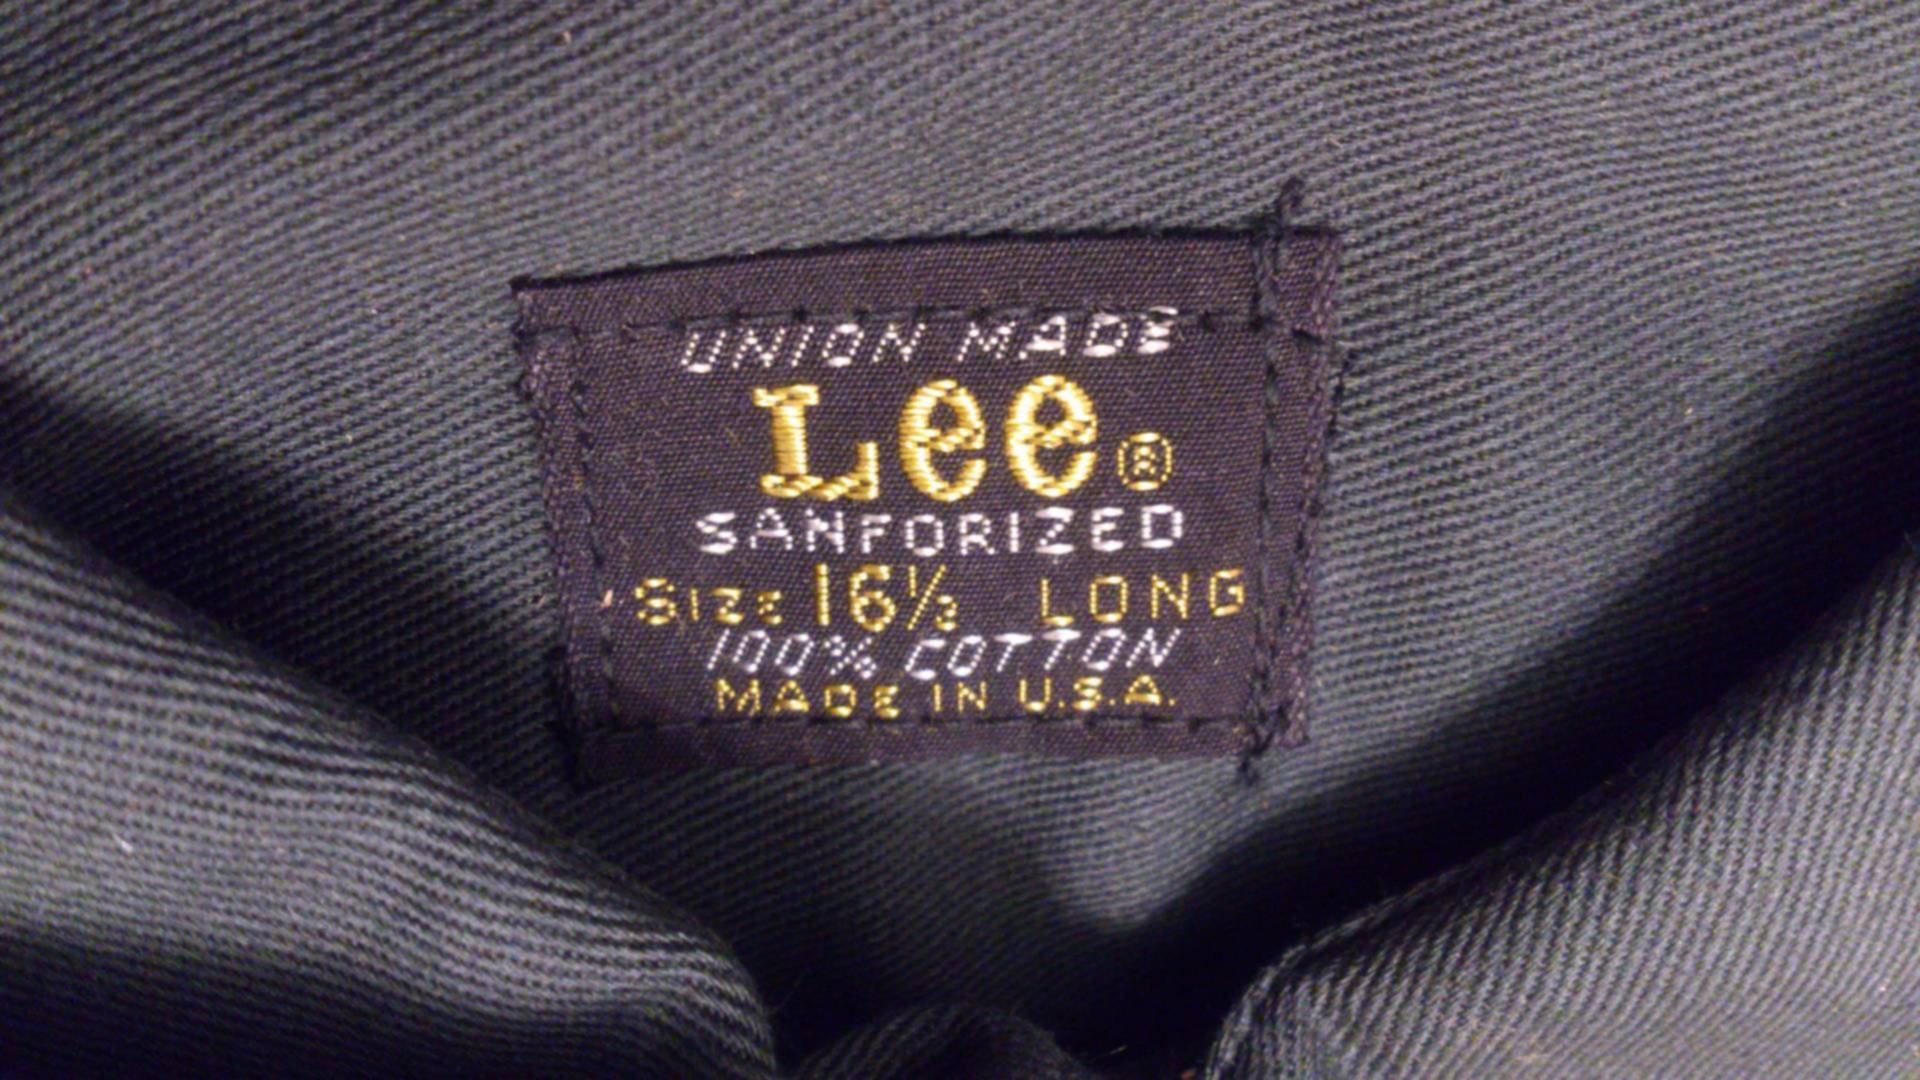 Made in usa 2. Woolrich made in USA флис новый. Комбинезон Lee made in USA. Lee sanforized. Union made.